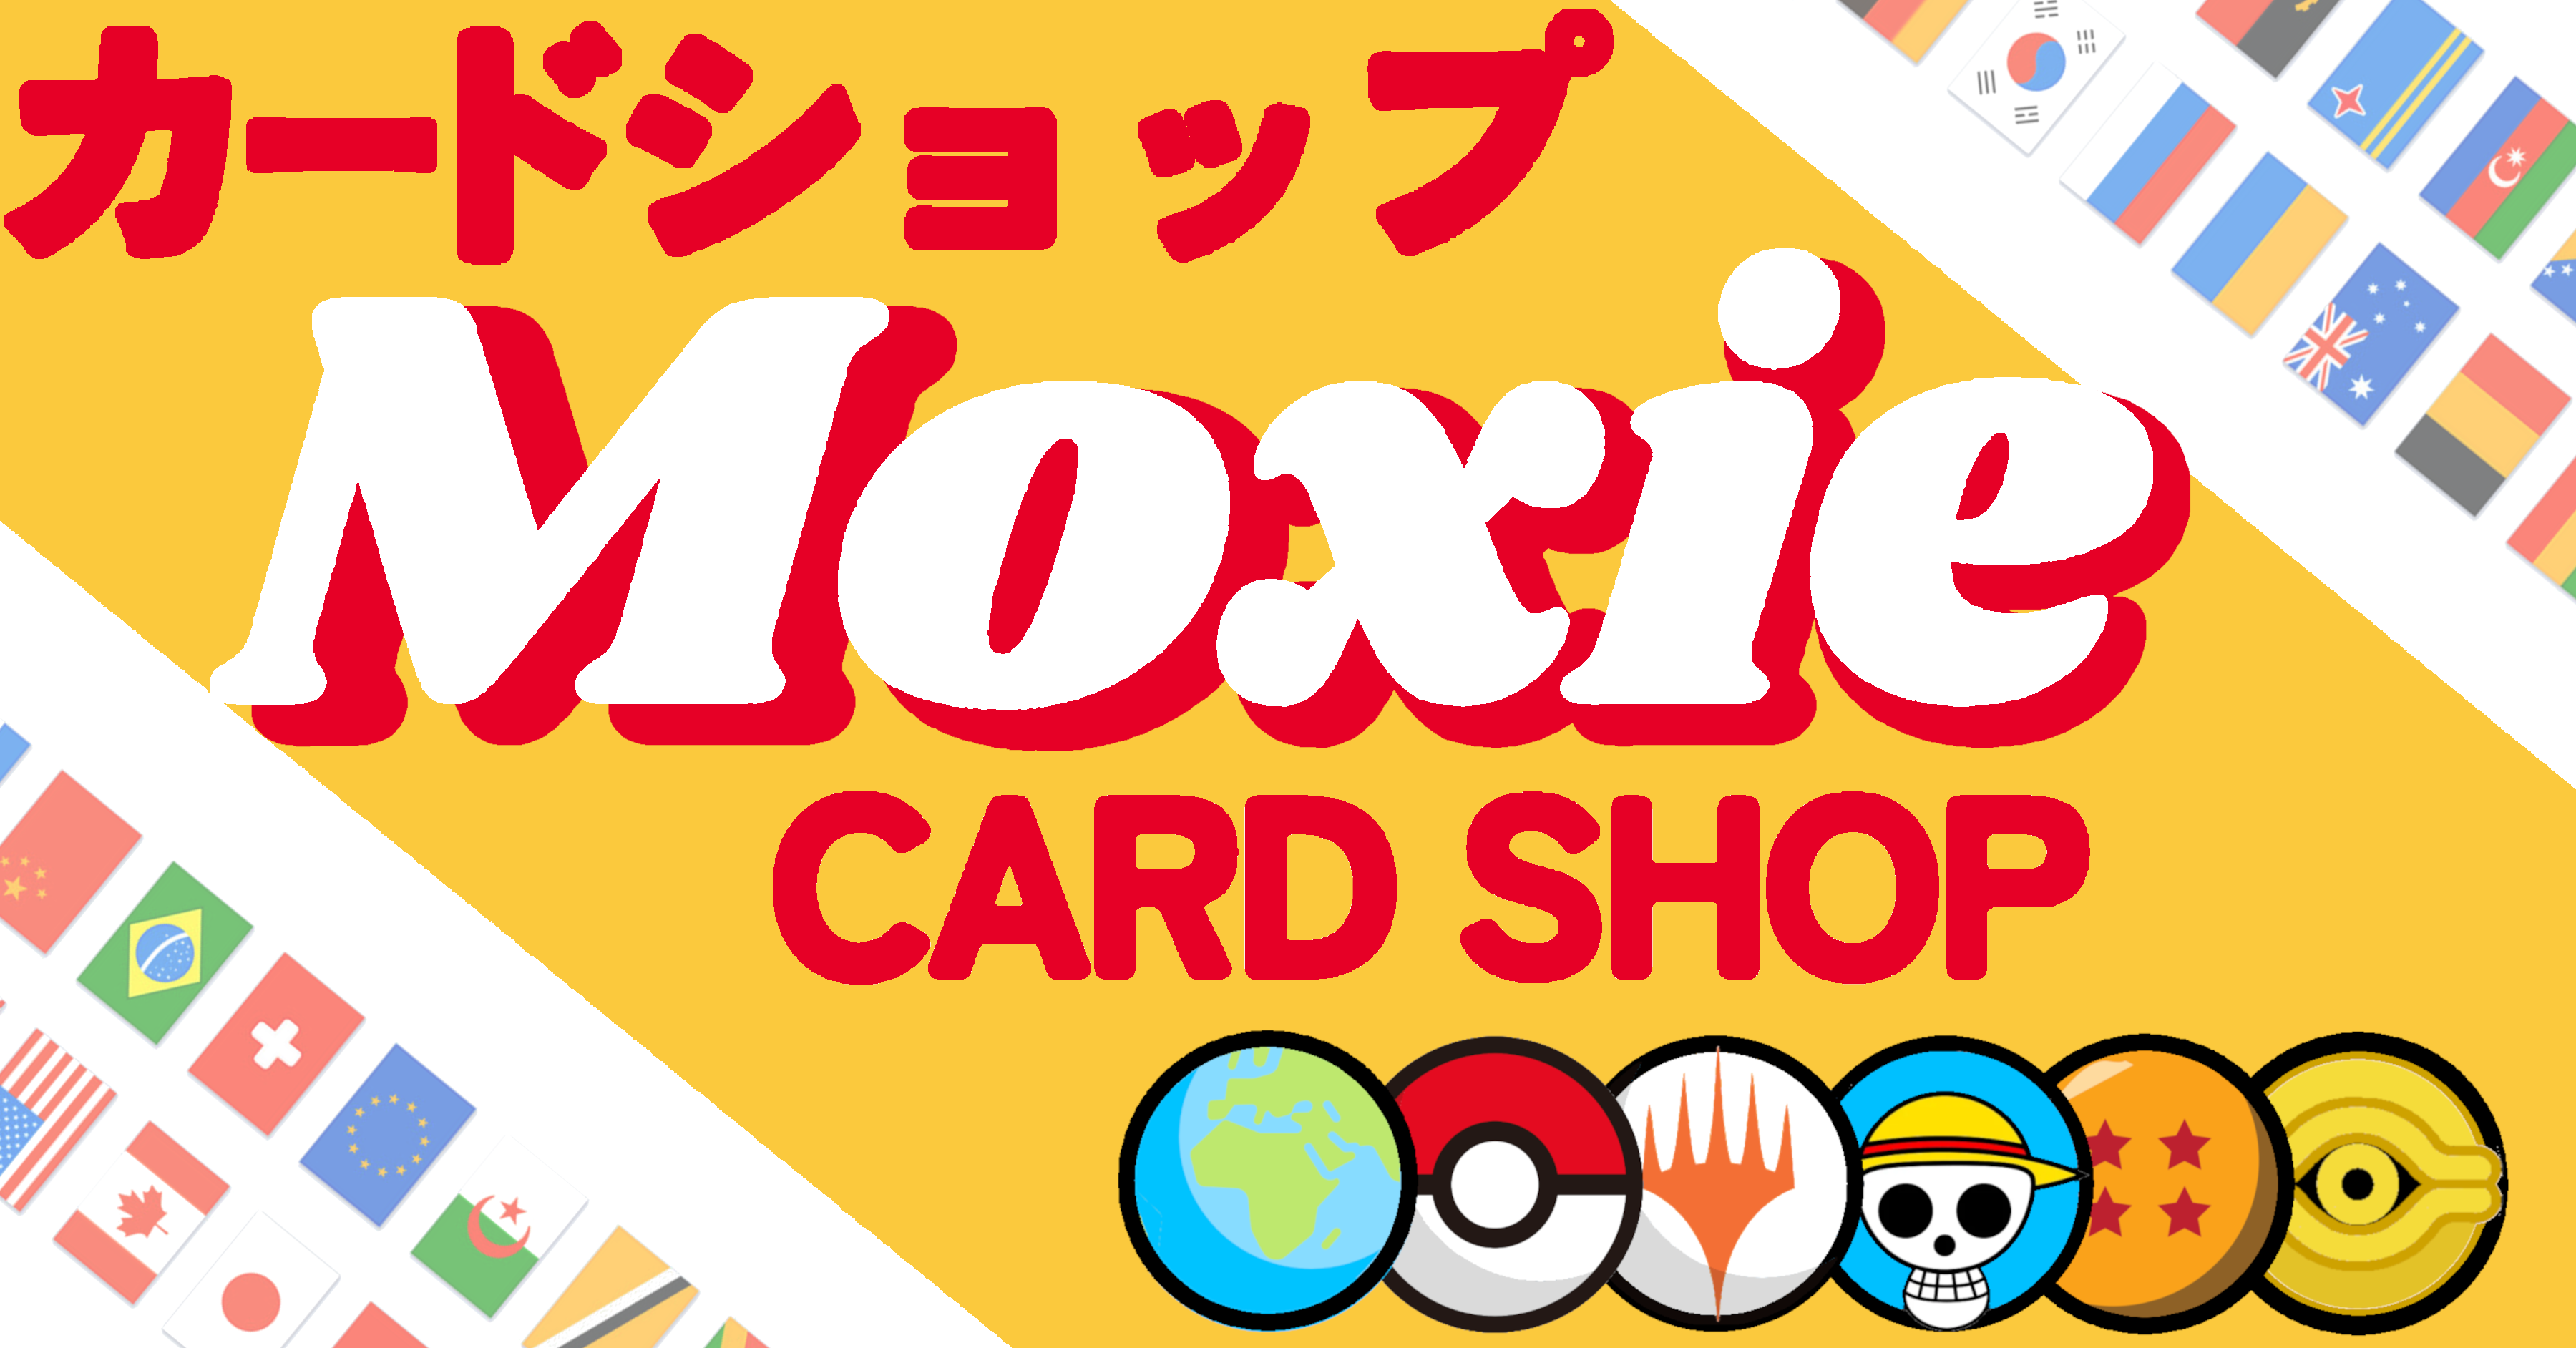 All Products! – Moxie Card Shop